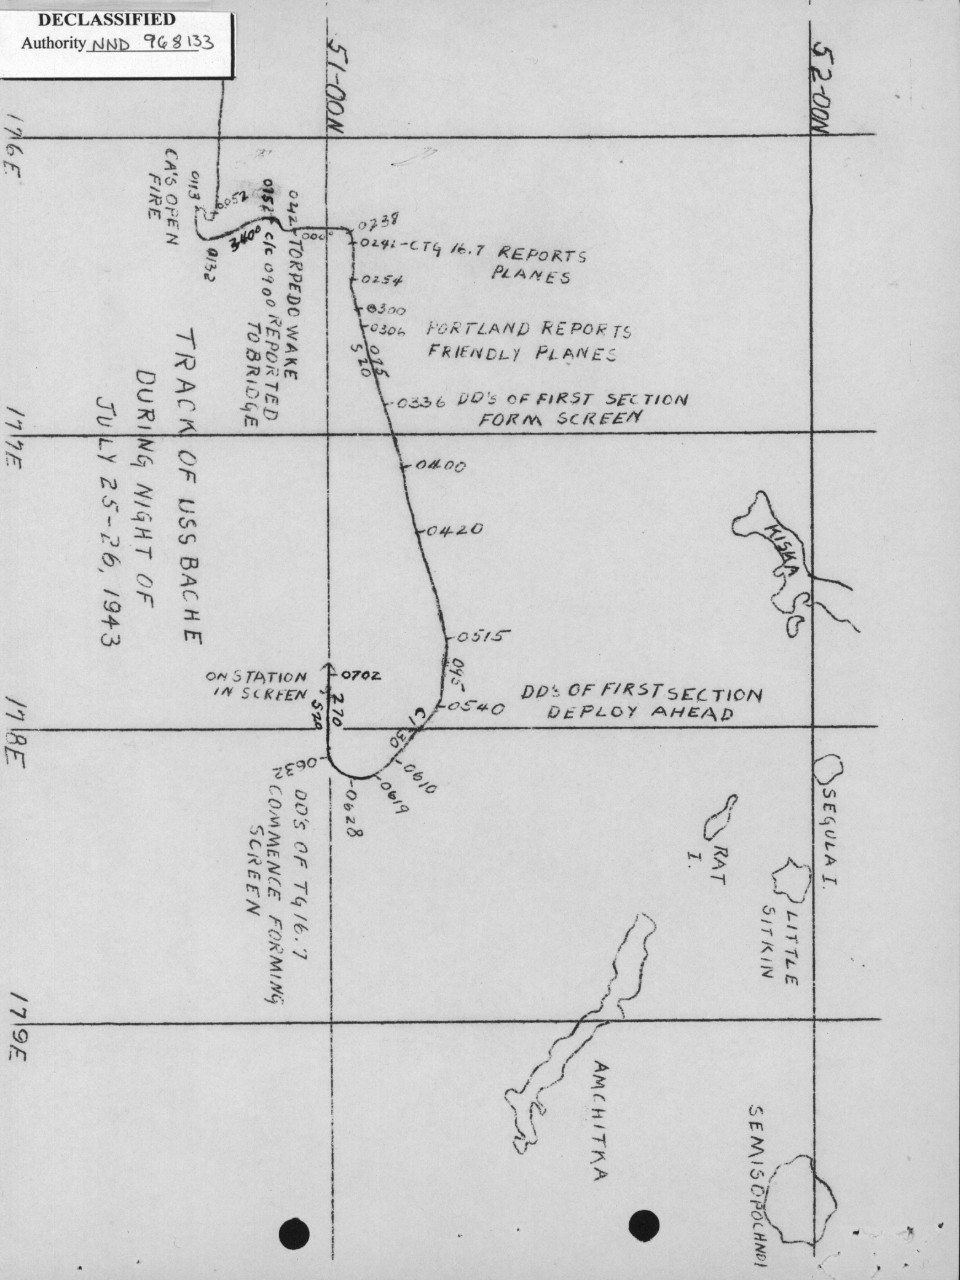 A track chart shows Bache’s maneuvers during the confusing Battle of the Pips, 26 July 1943. (Bache (DD-470), Action Report for Night of 25–26 July 1943, in Aleutian Area)